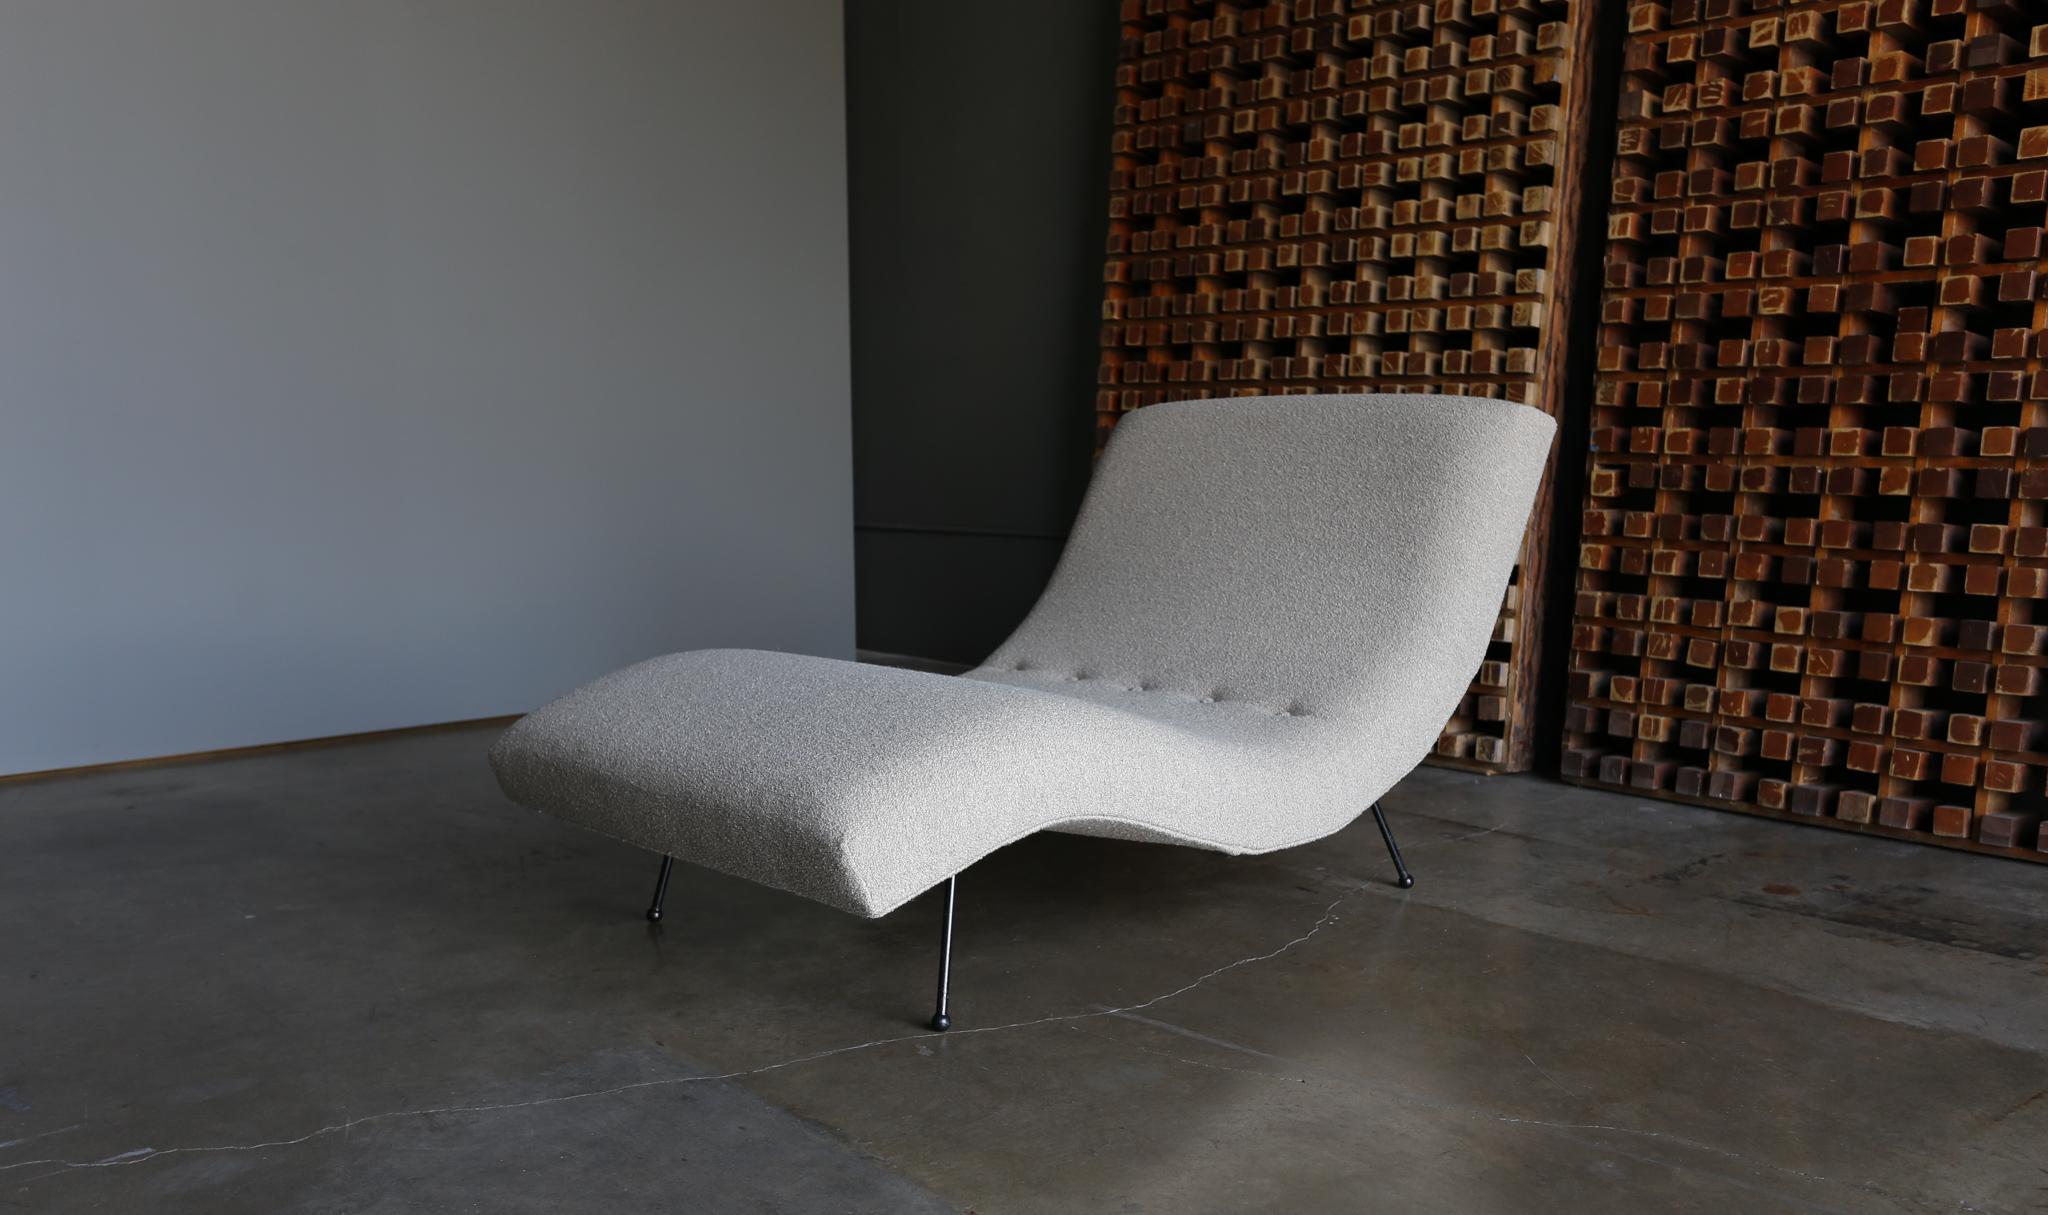 Mid-Century Modern Adrian Pearsall Wave Chaise Lounge for Craft Associates, circa 1960